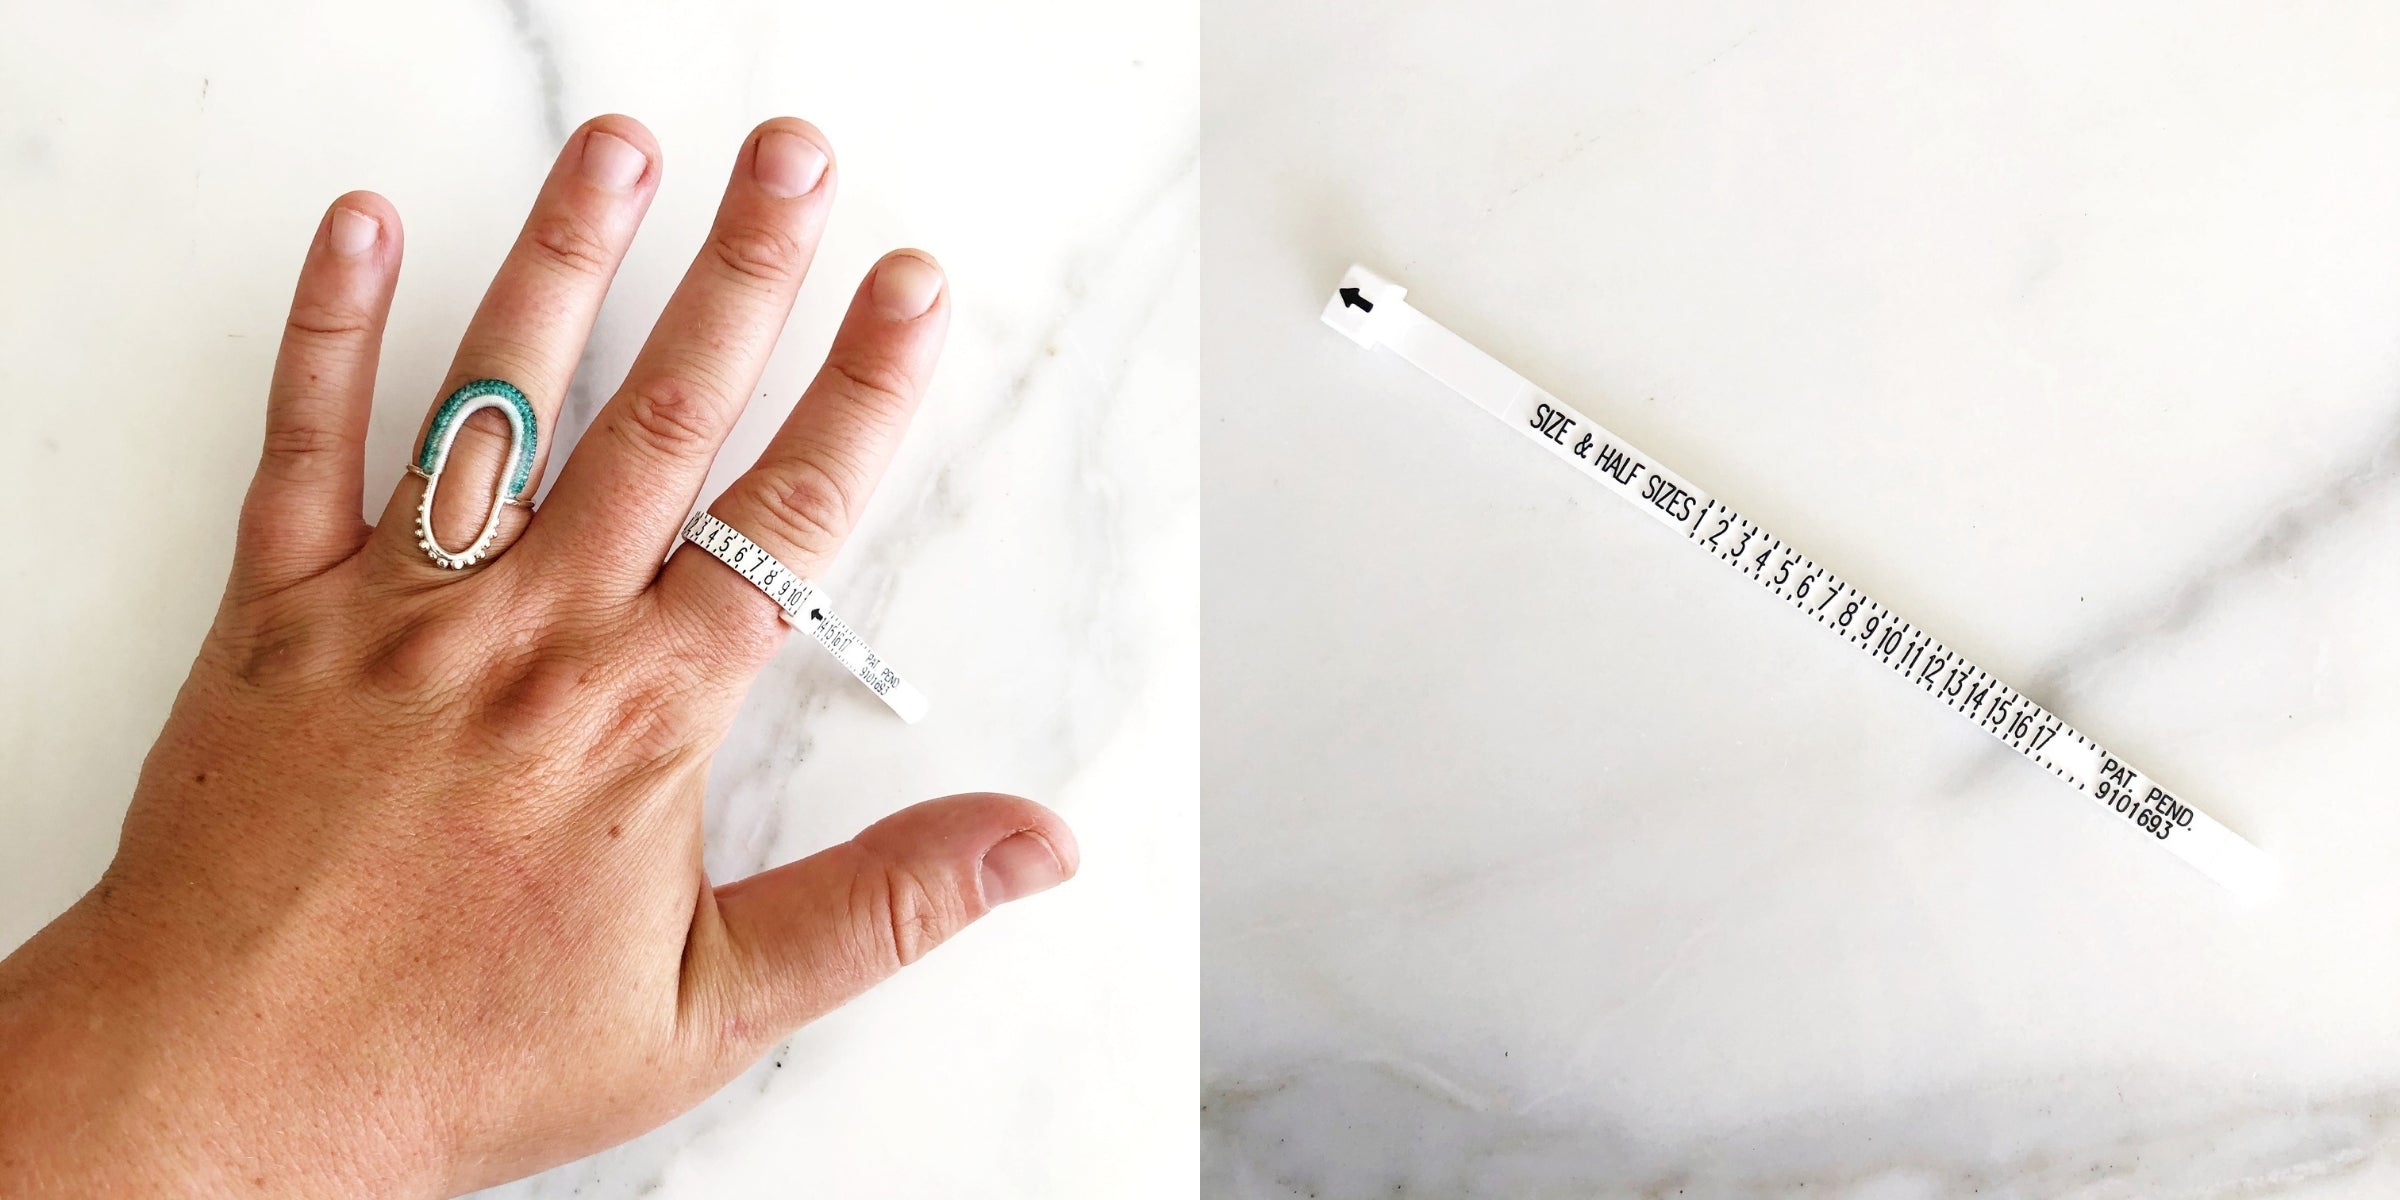 How To Measure Your Ring Size at Home With Accuracy and Perfection